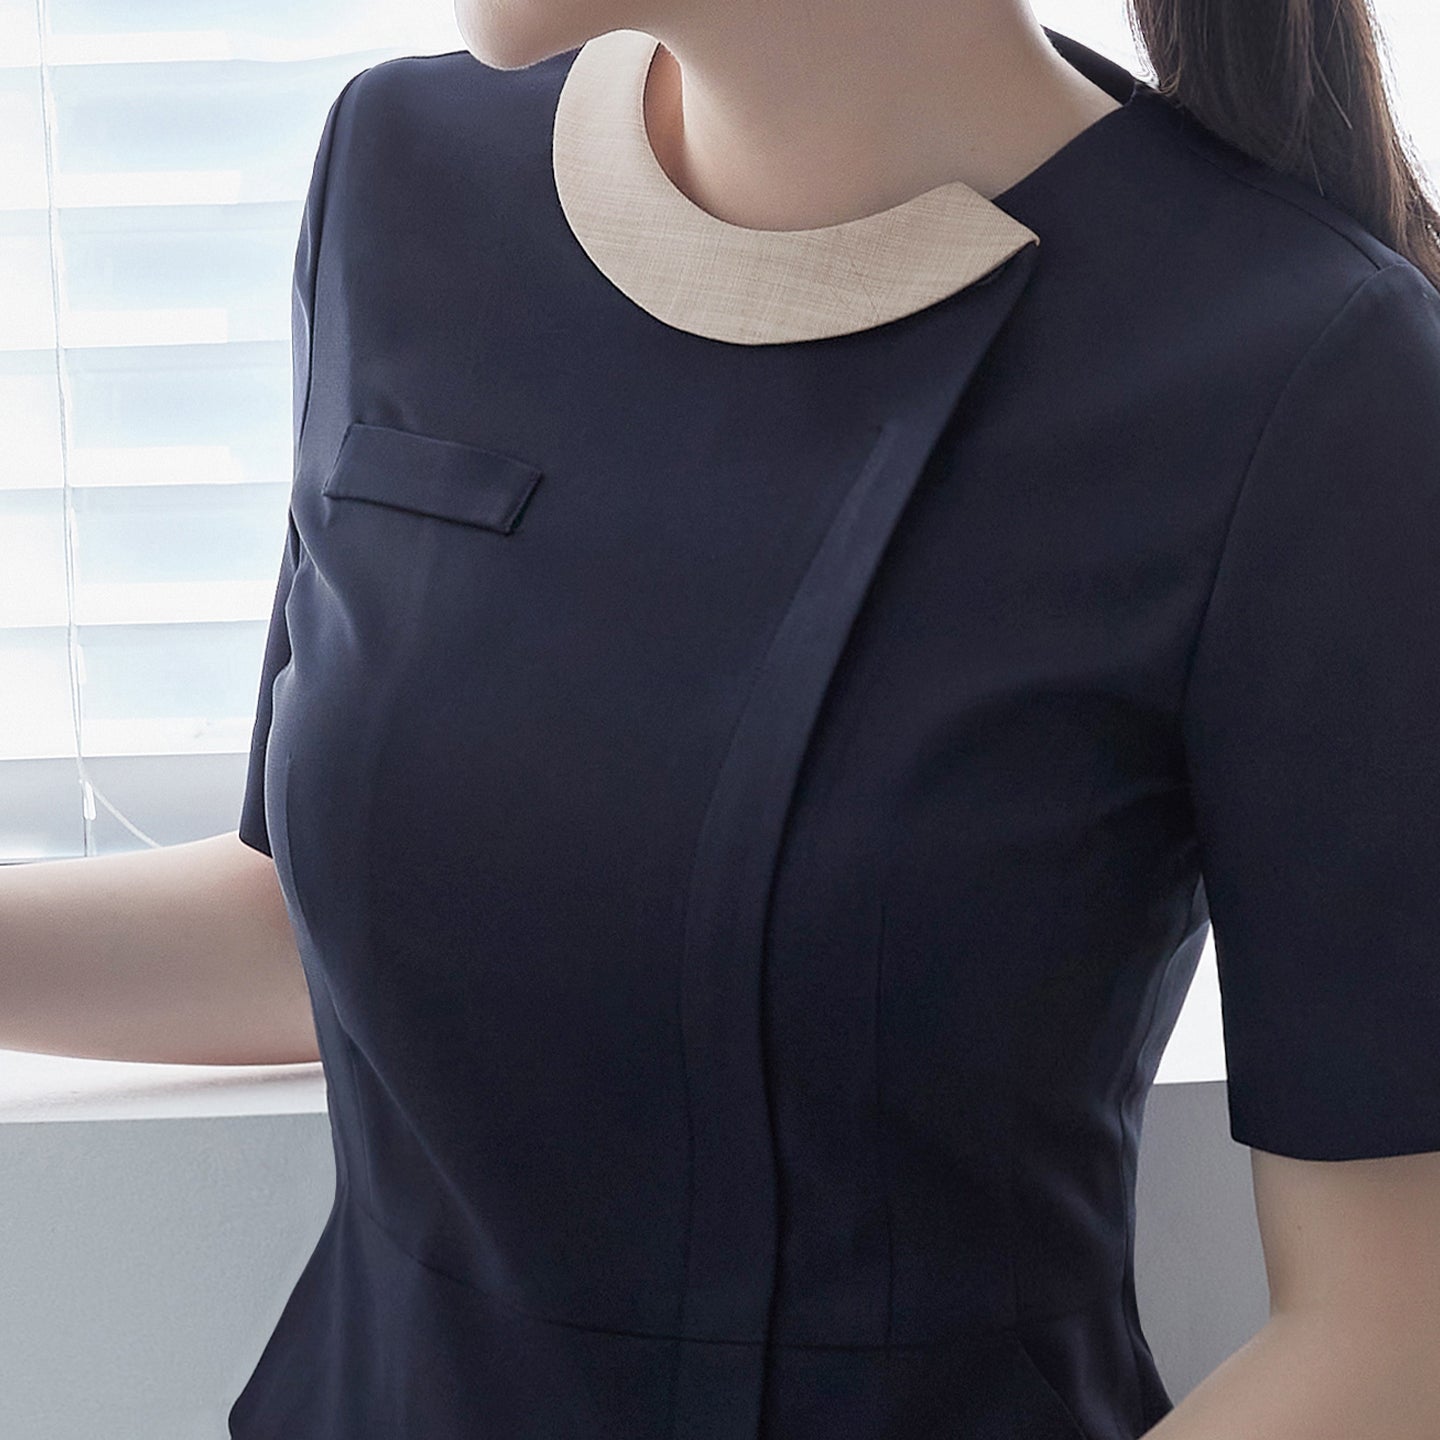  Detail view of a woman wearing a navy round-neck front zipper top with a contrasting beige collar, standing by a window,Navy